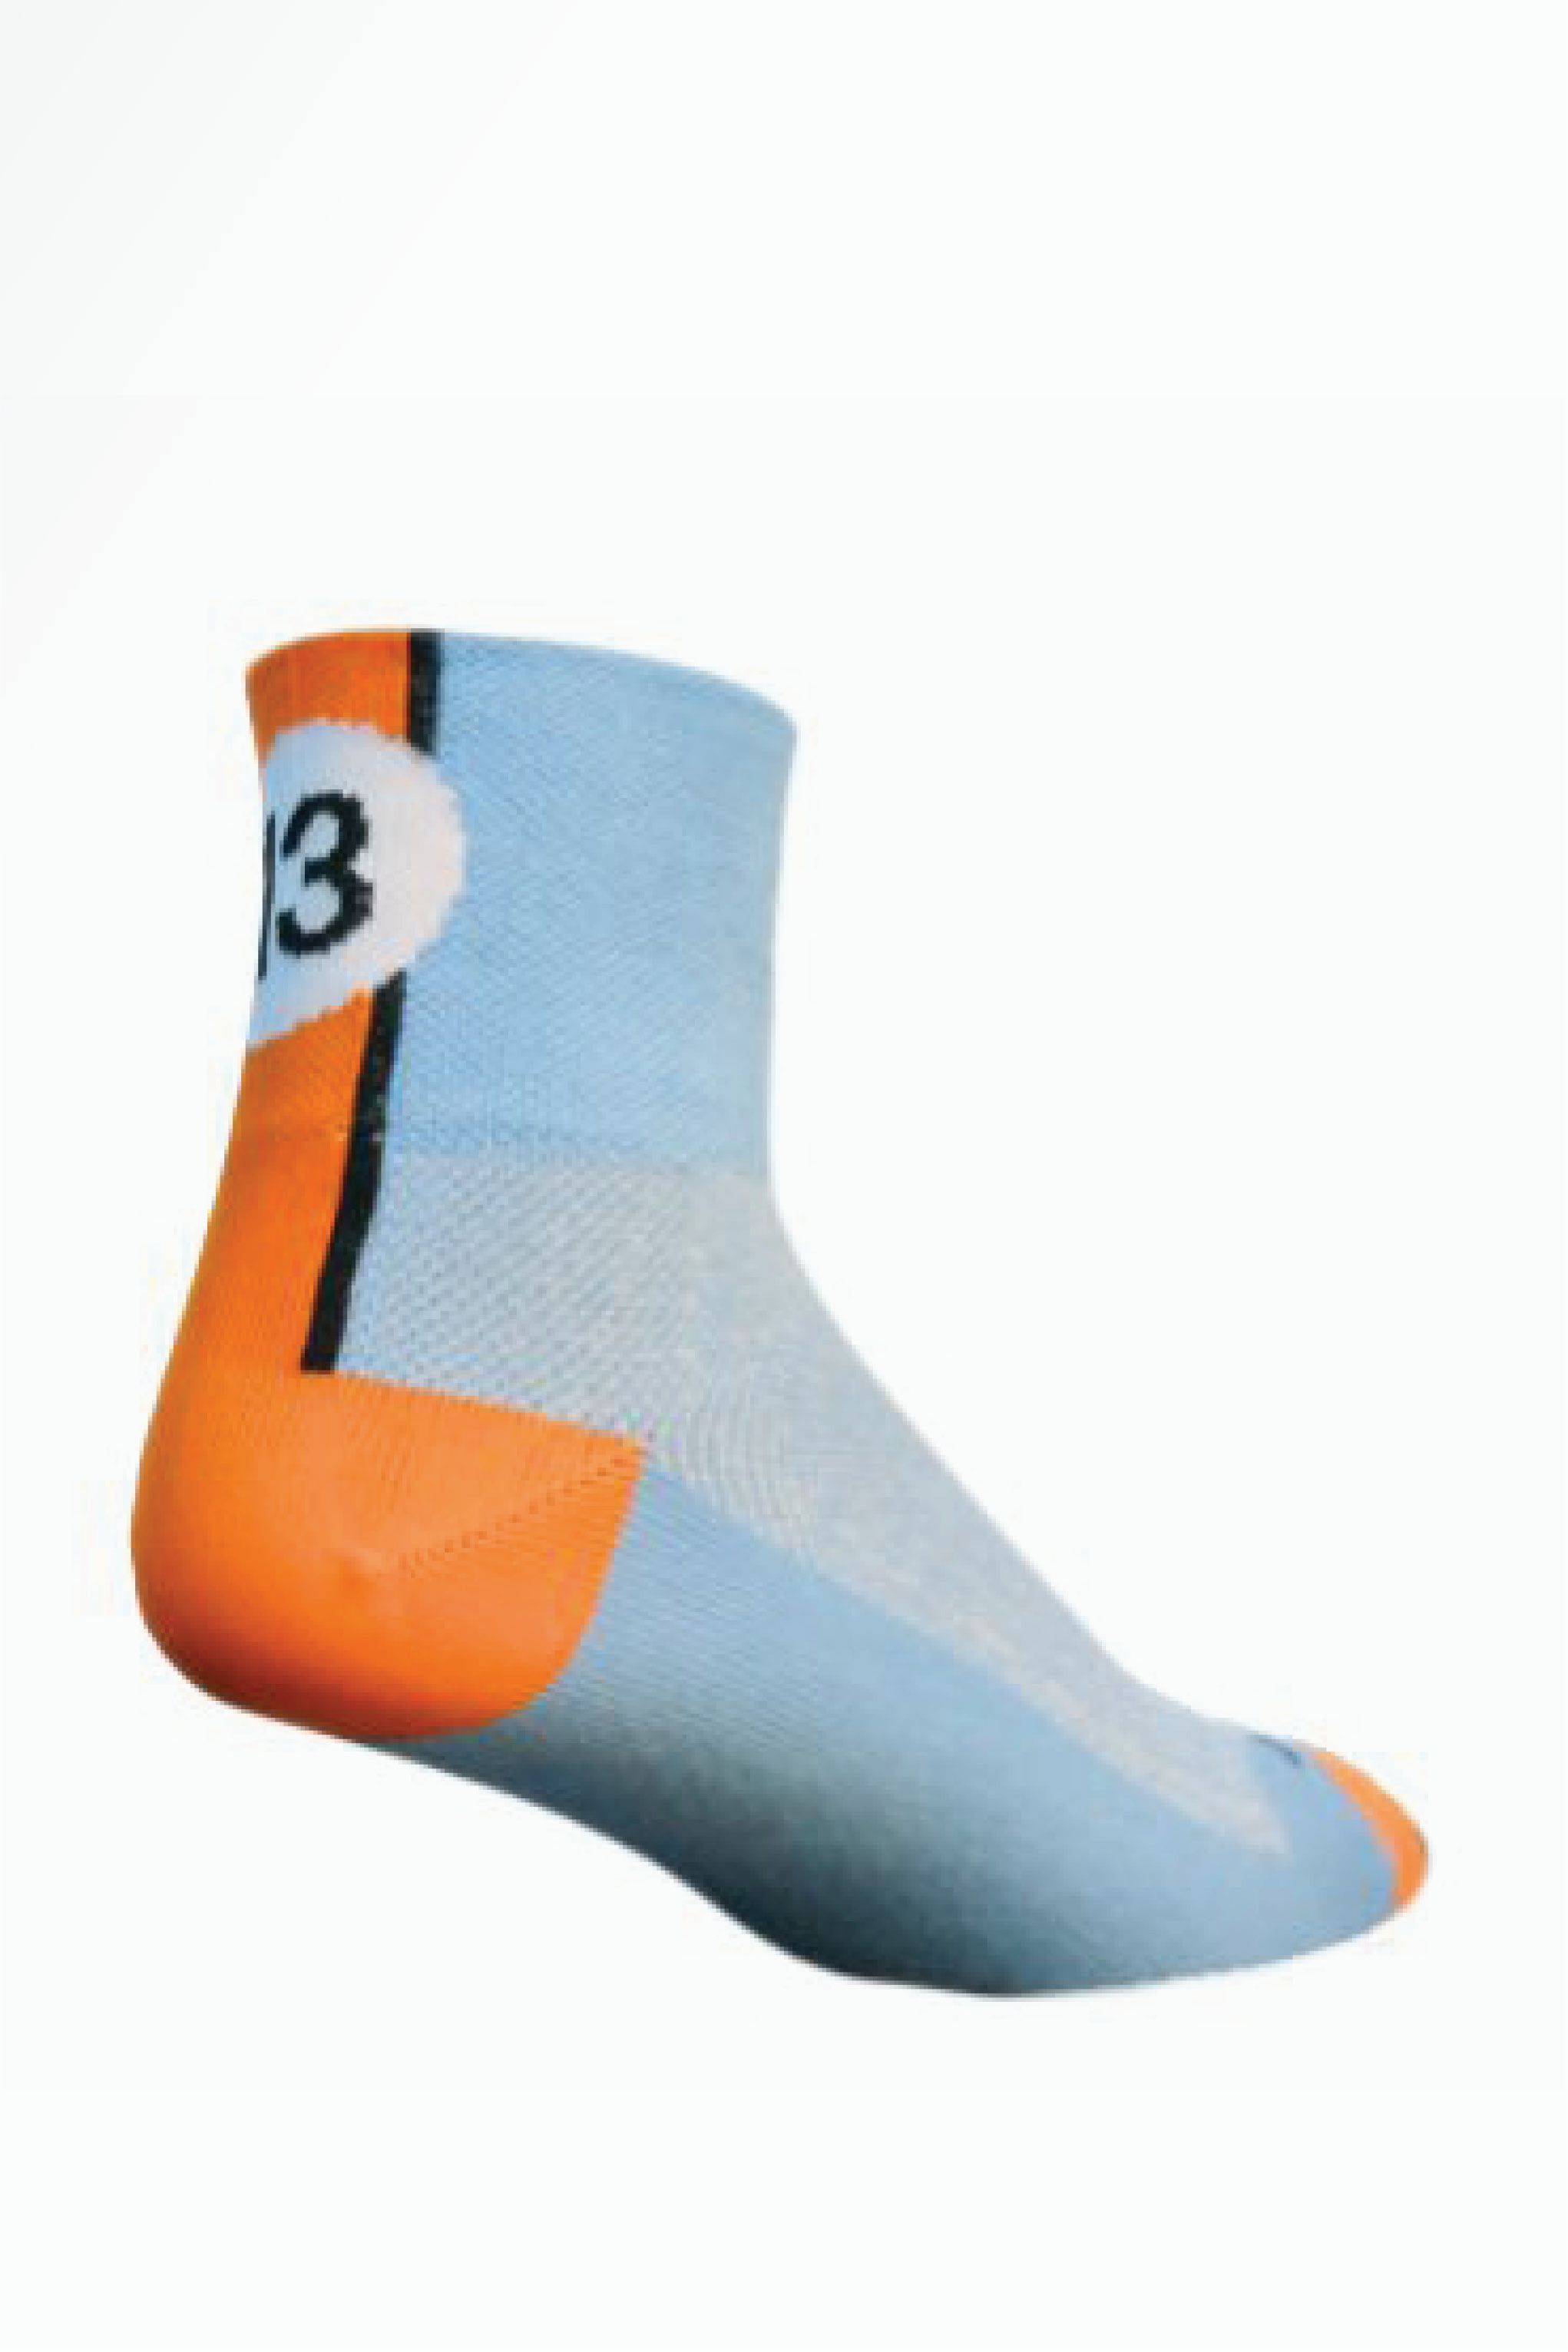 Details about   Pro Mens Womens Cycling Socks XC Riding Sports Ankle Socks Bicycle Socks White 